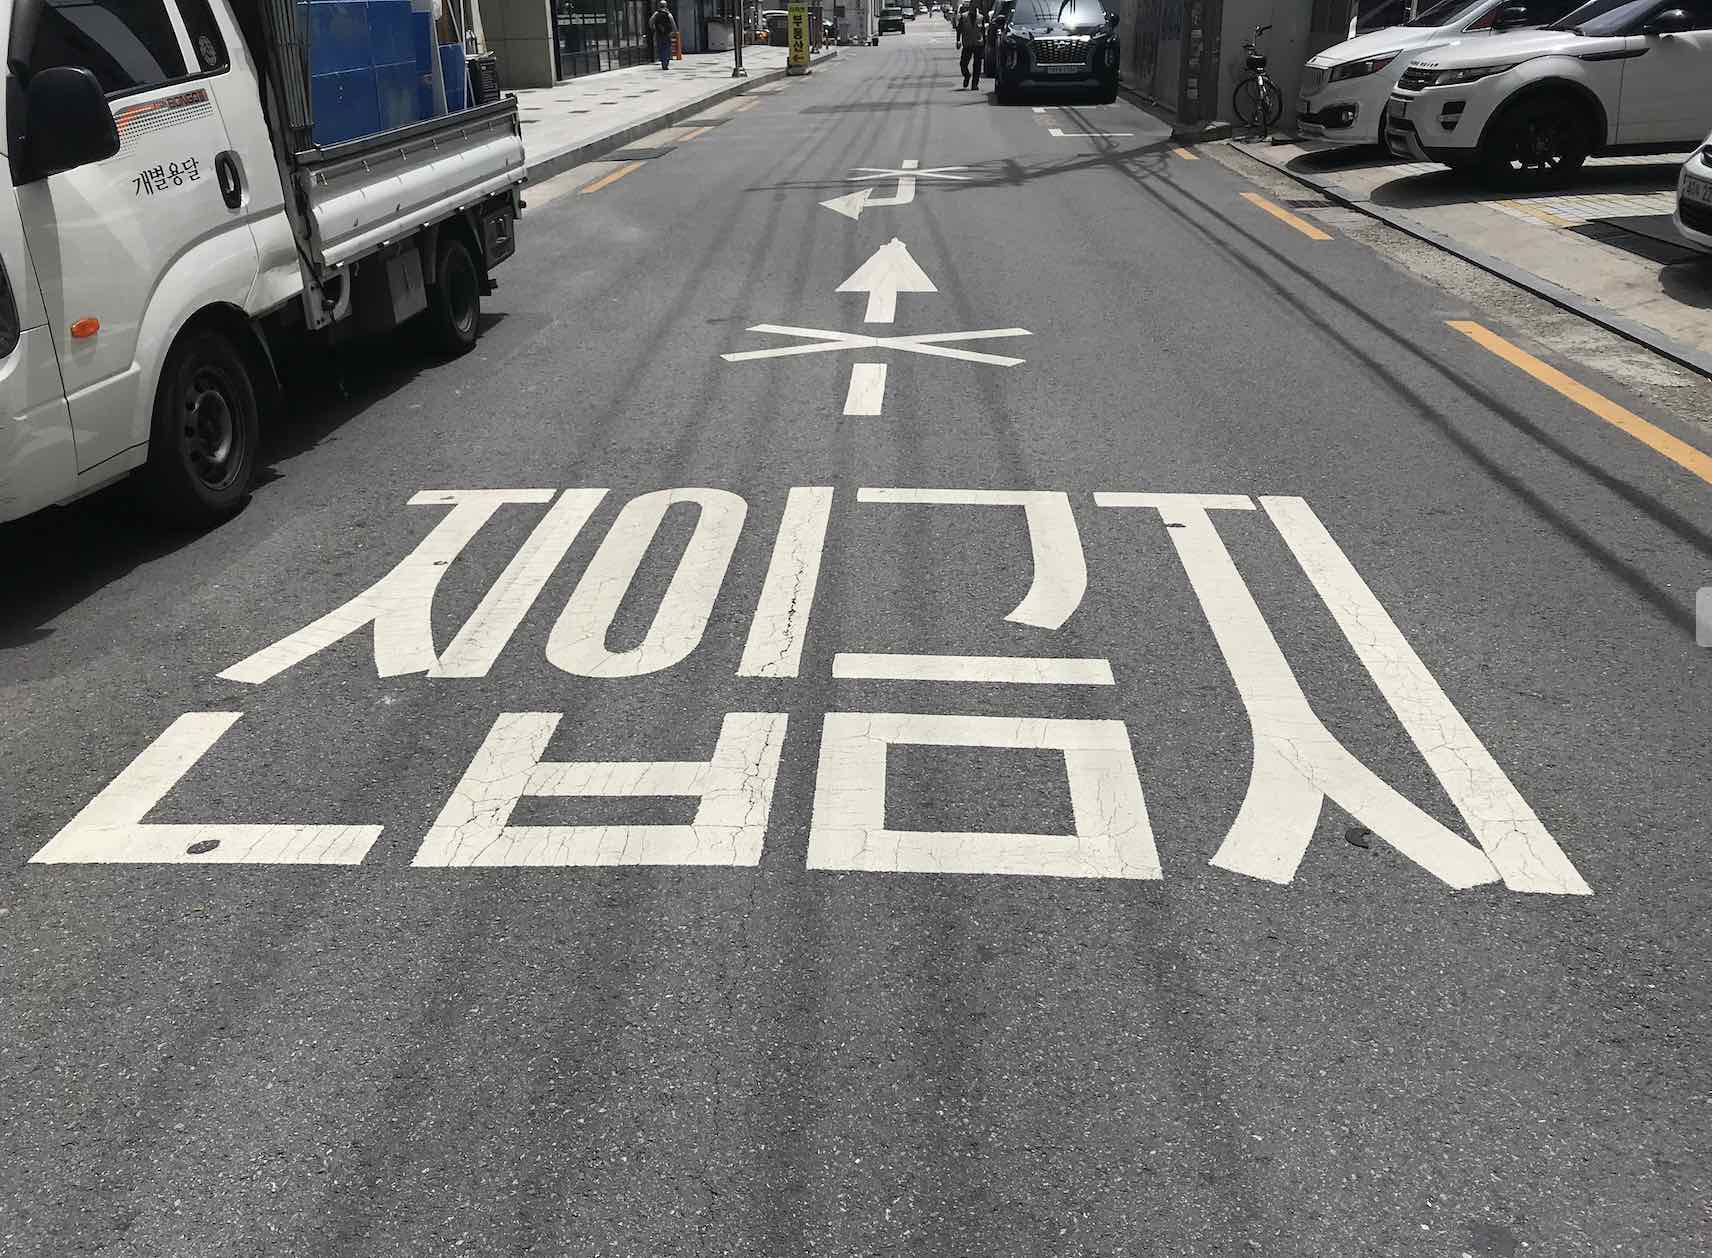 No Entry sign in Korean for the one way street